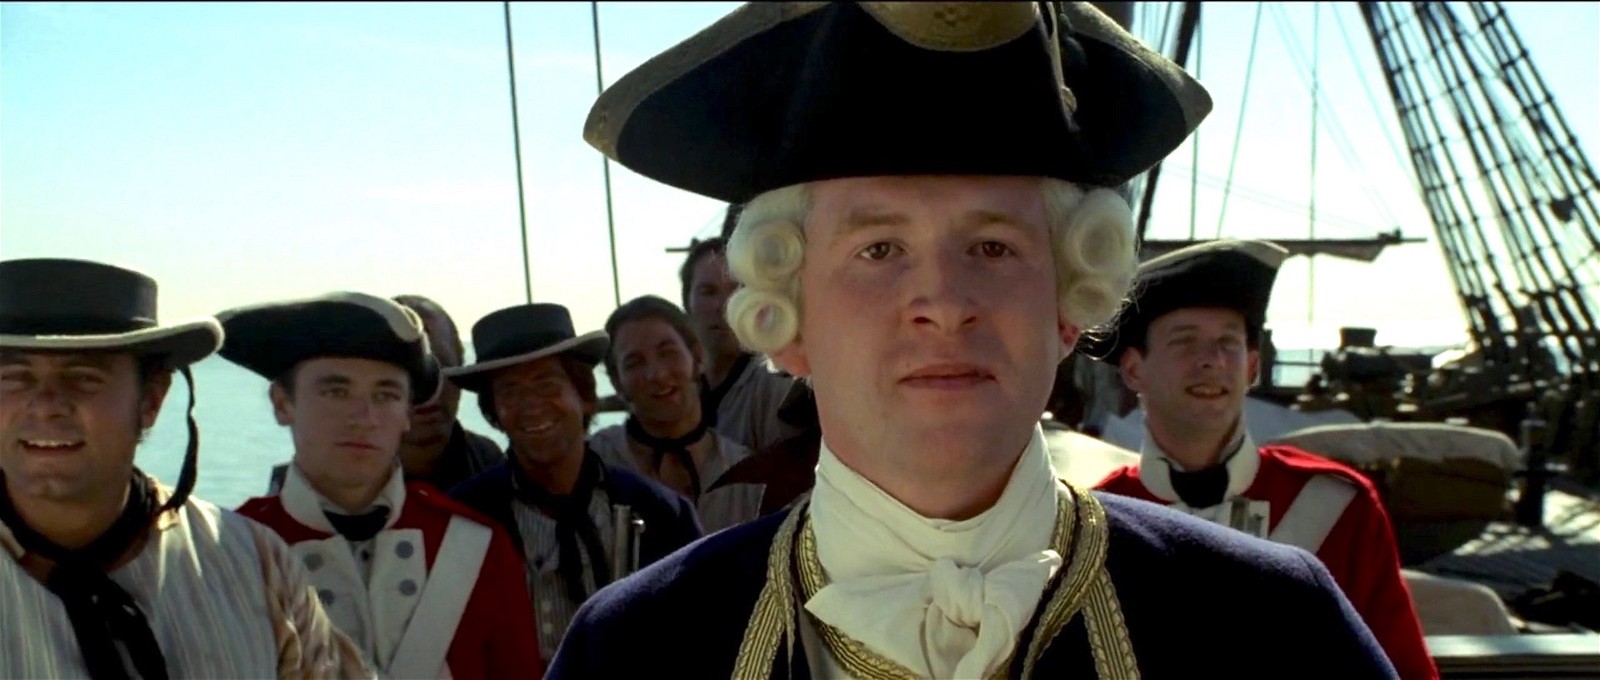 Damian O'Hare as Lieutenant Gillette in a still from Pirates of the Caribbean: The Curse of the Black Pearl (2003)